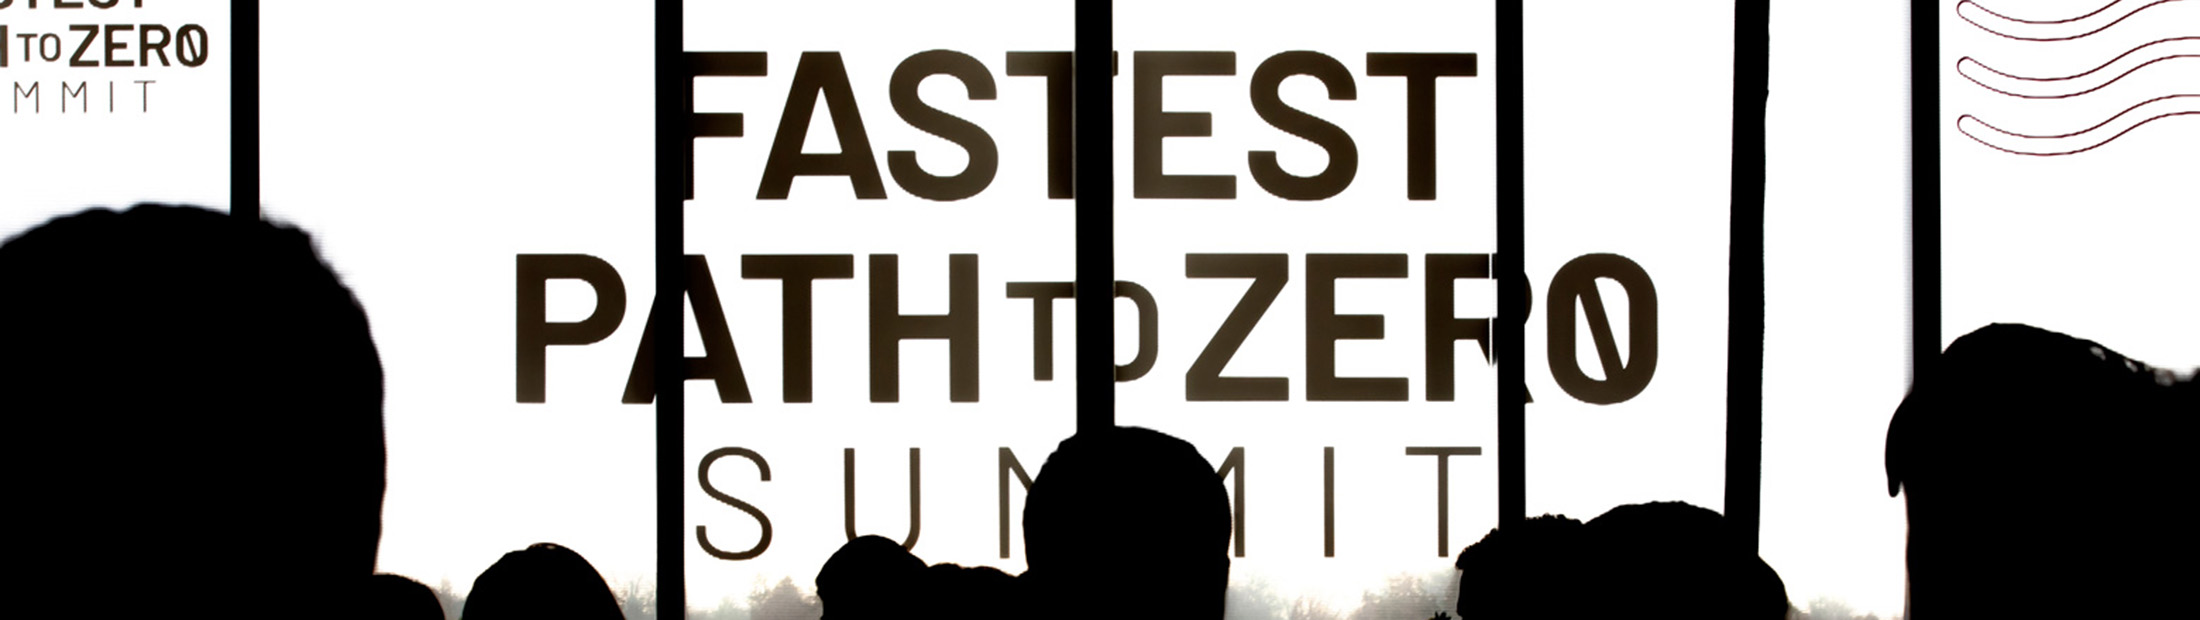 Silhouettes of people in a crowd with "Fastest Path to Zero Summit" written at the front.